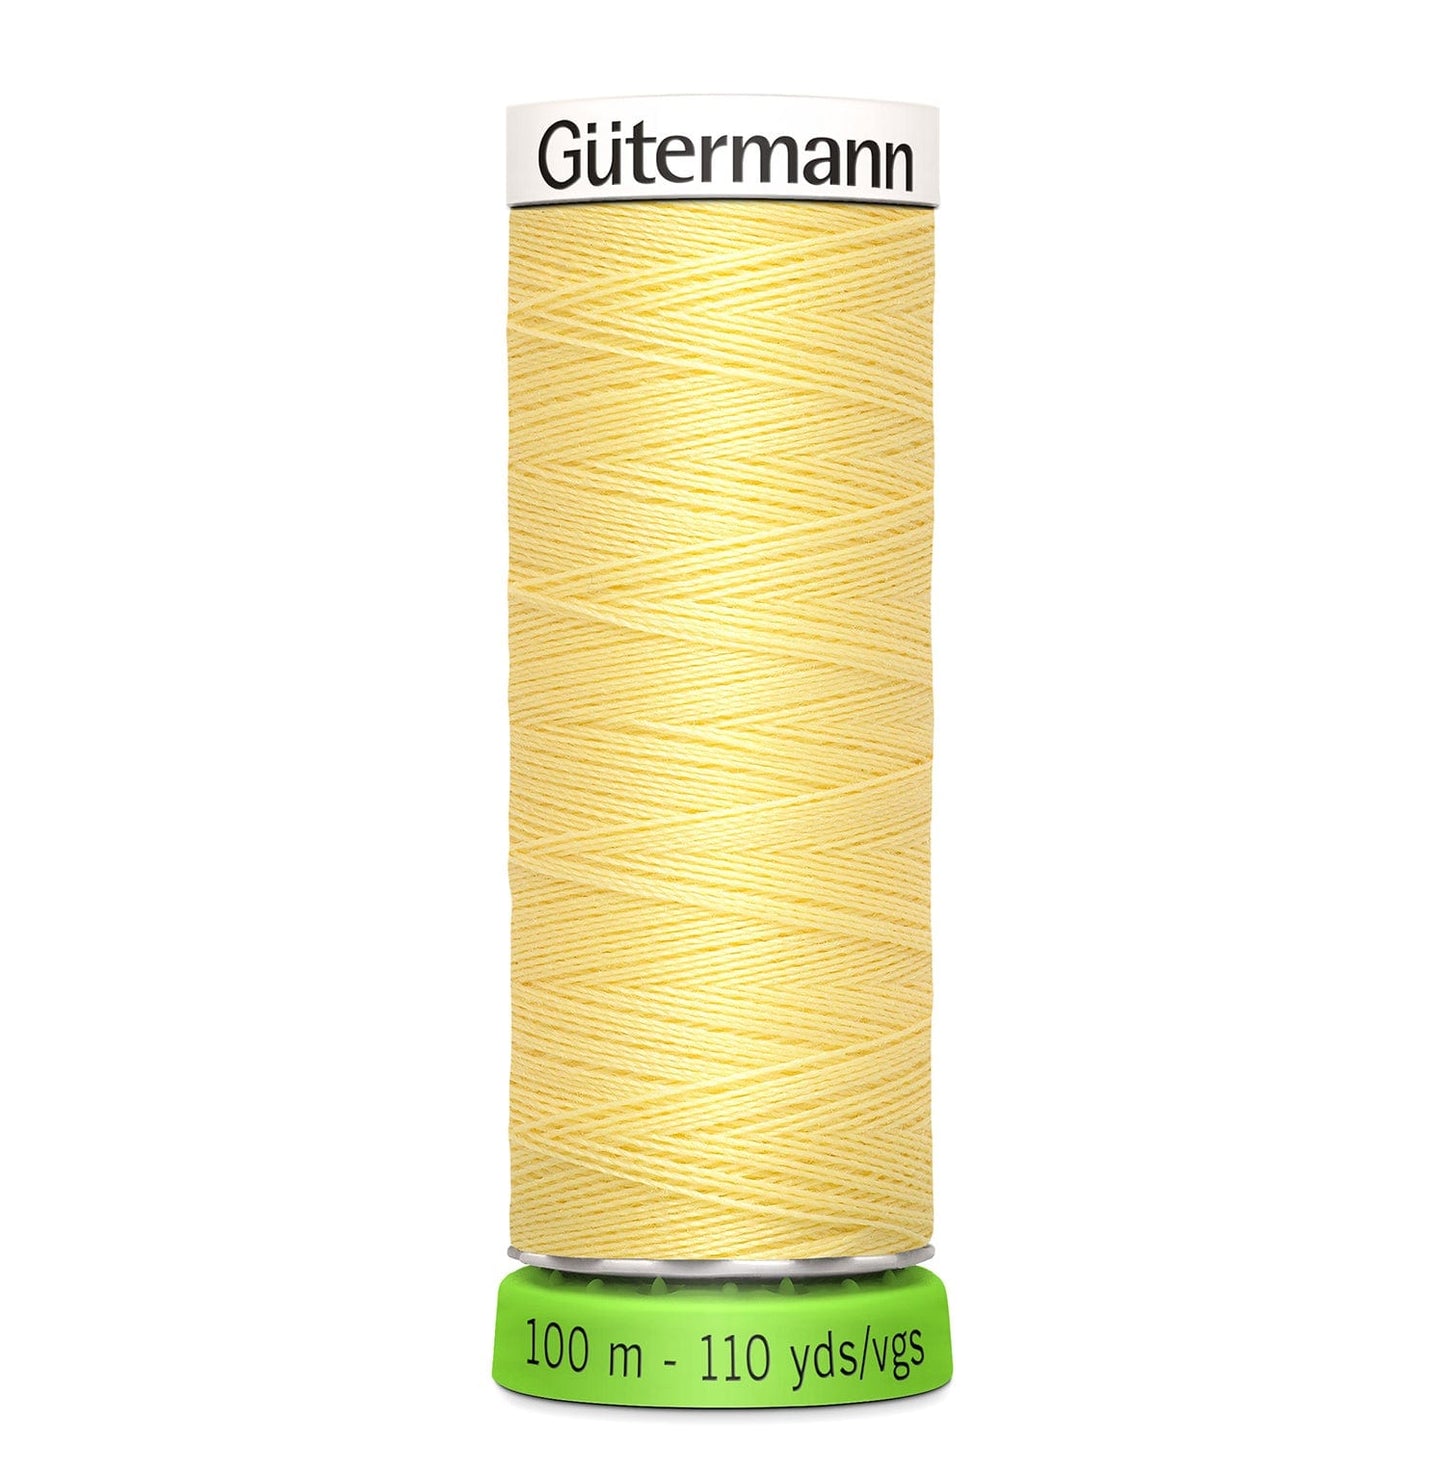 100m Reel Gütermann Recycled Sew-All Thread in Soft Yellow no. 578